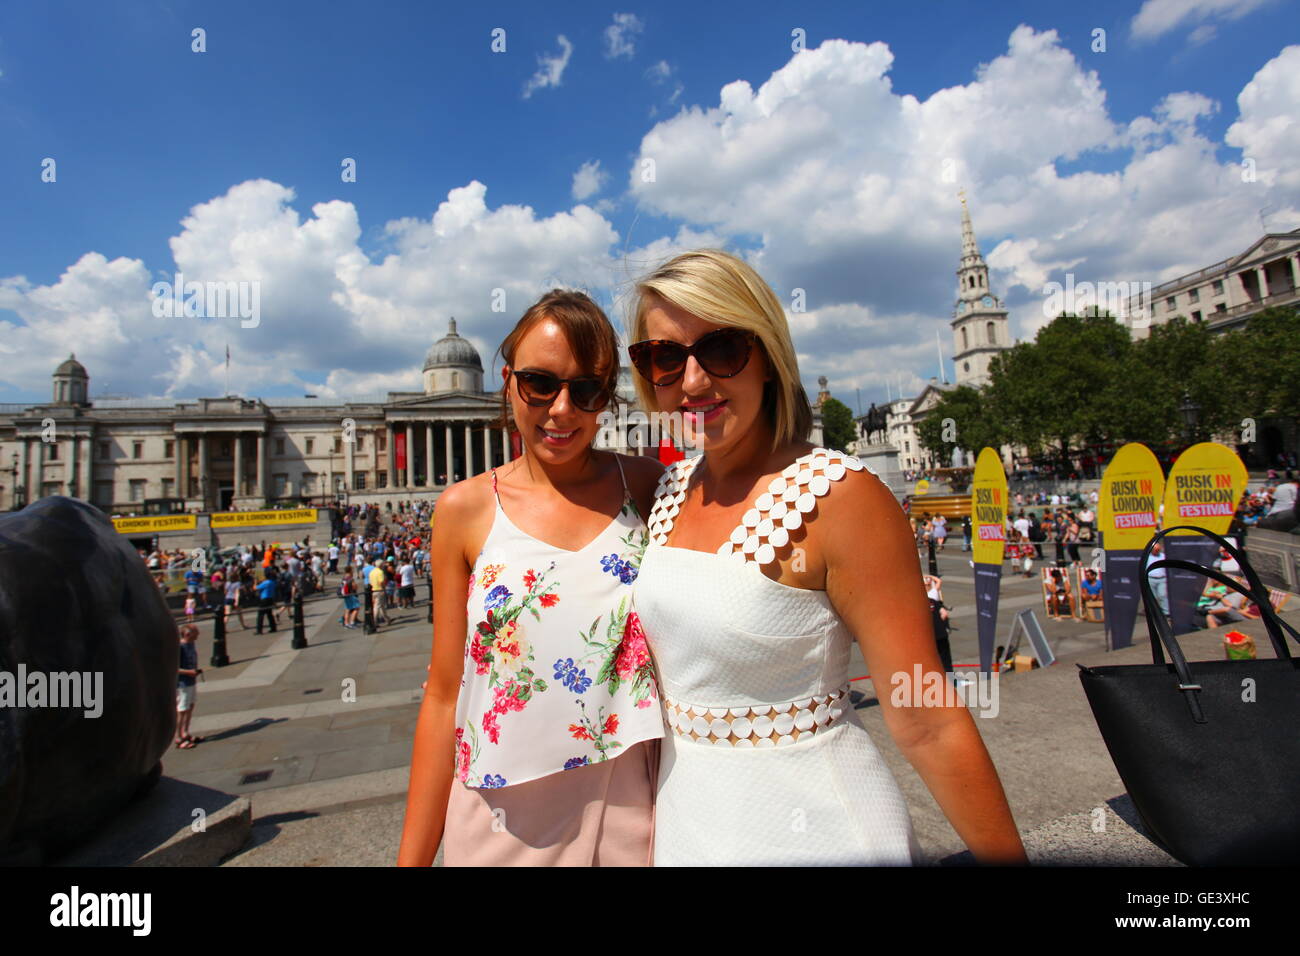 London, Great Britain. 23rd July, 2016. Two women enjoying the glorious hot weather that England is having at the moment. Penelope Barritt/Alamy Live News Stock Photo